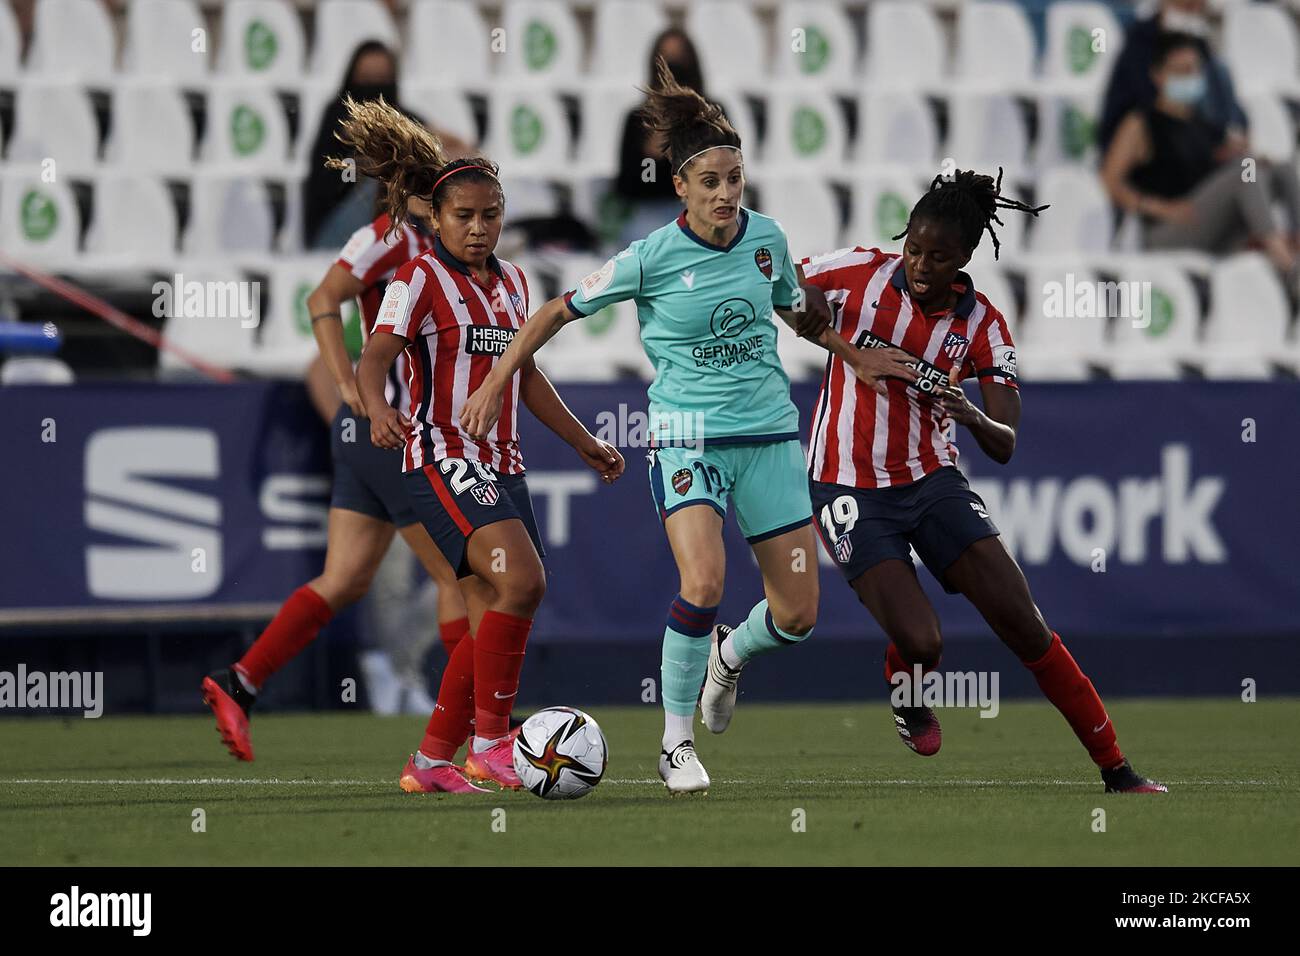 Esther Gonzalez of Levante and Aissatou Tounkara of Atletico competes for the ball during to the Copa de la Reina Semifinal match between Atletico de Madrid and Levante at Estadio Municipal de Butarque on May 27, 2021 in Leganes, Spain. (Photo by Jose Breton/Pics Action/NurPhoto) Stock Photo